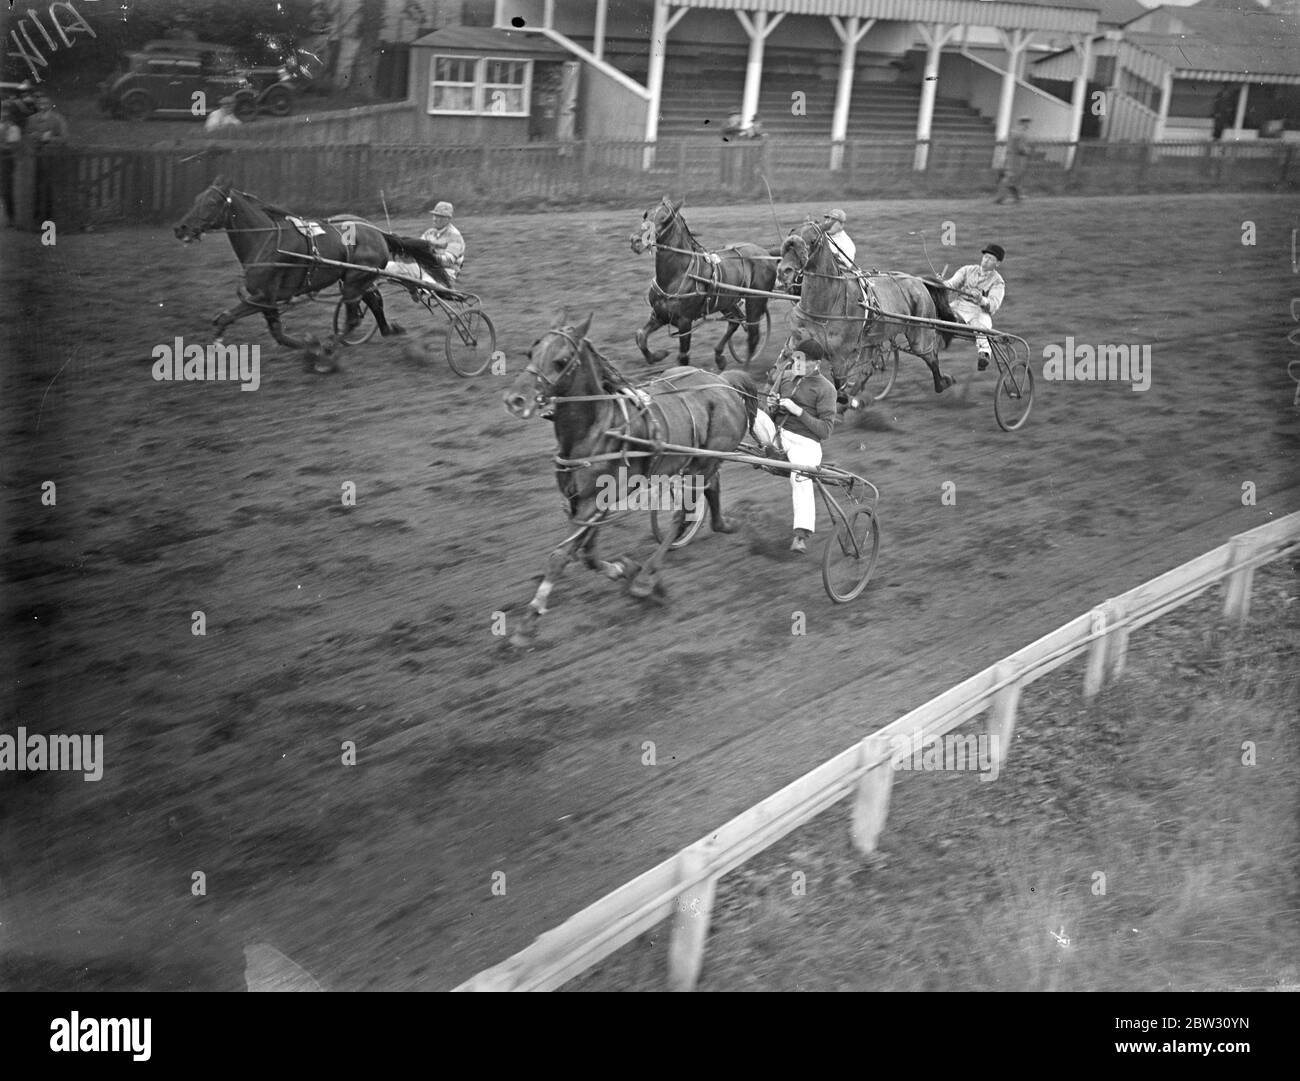 Winning by a nose at Greenford trotting races . Mr Craddock 's La Milo II , ridden by Mr Brazier , won the Amateur Drivers Sweepstake trotting race at Greenford , Middlesex , from Misery , by a nose . La Milo II nearest camera , winning the Amateur Drivers Sweepstake by a nose at Greenford . 5 September 1932 Stock Photo